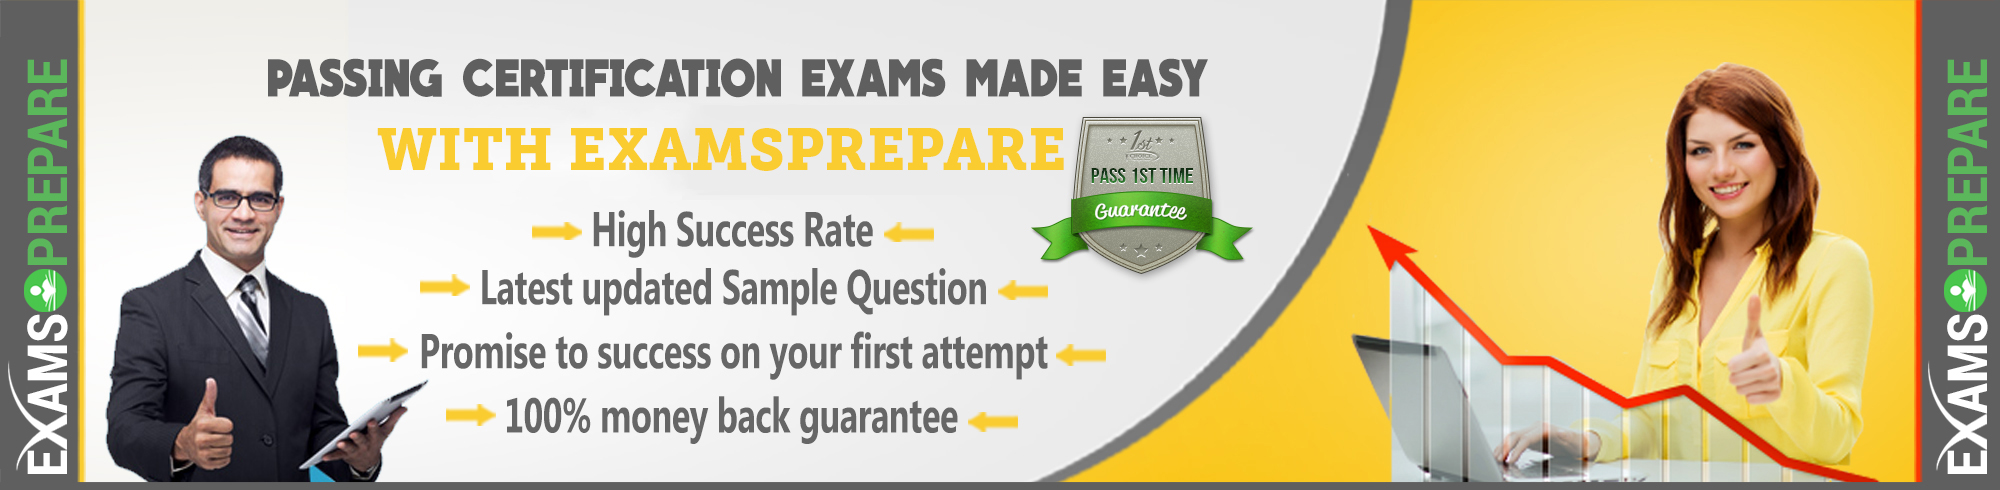 Learn with Real 1Z0-819 Exam Dumps